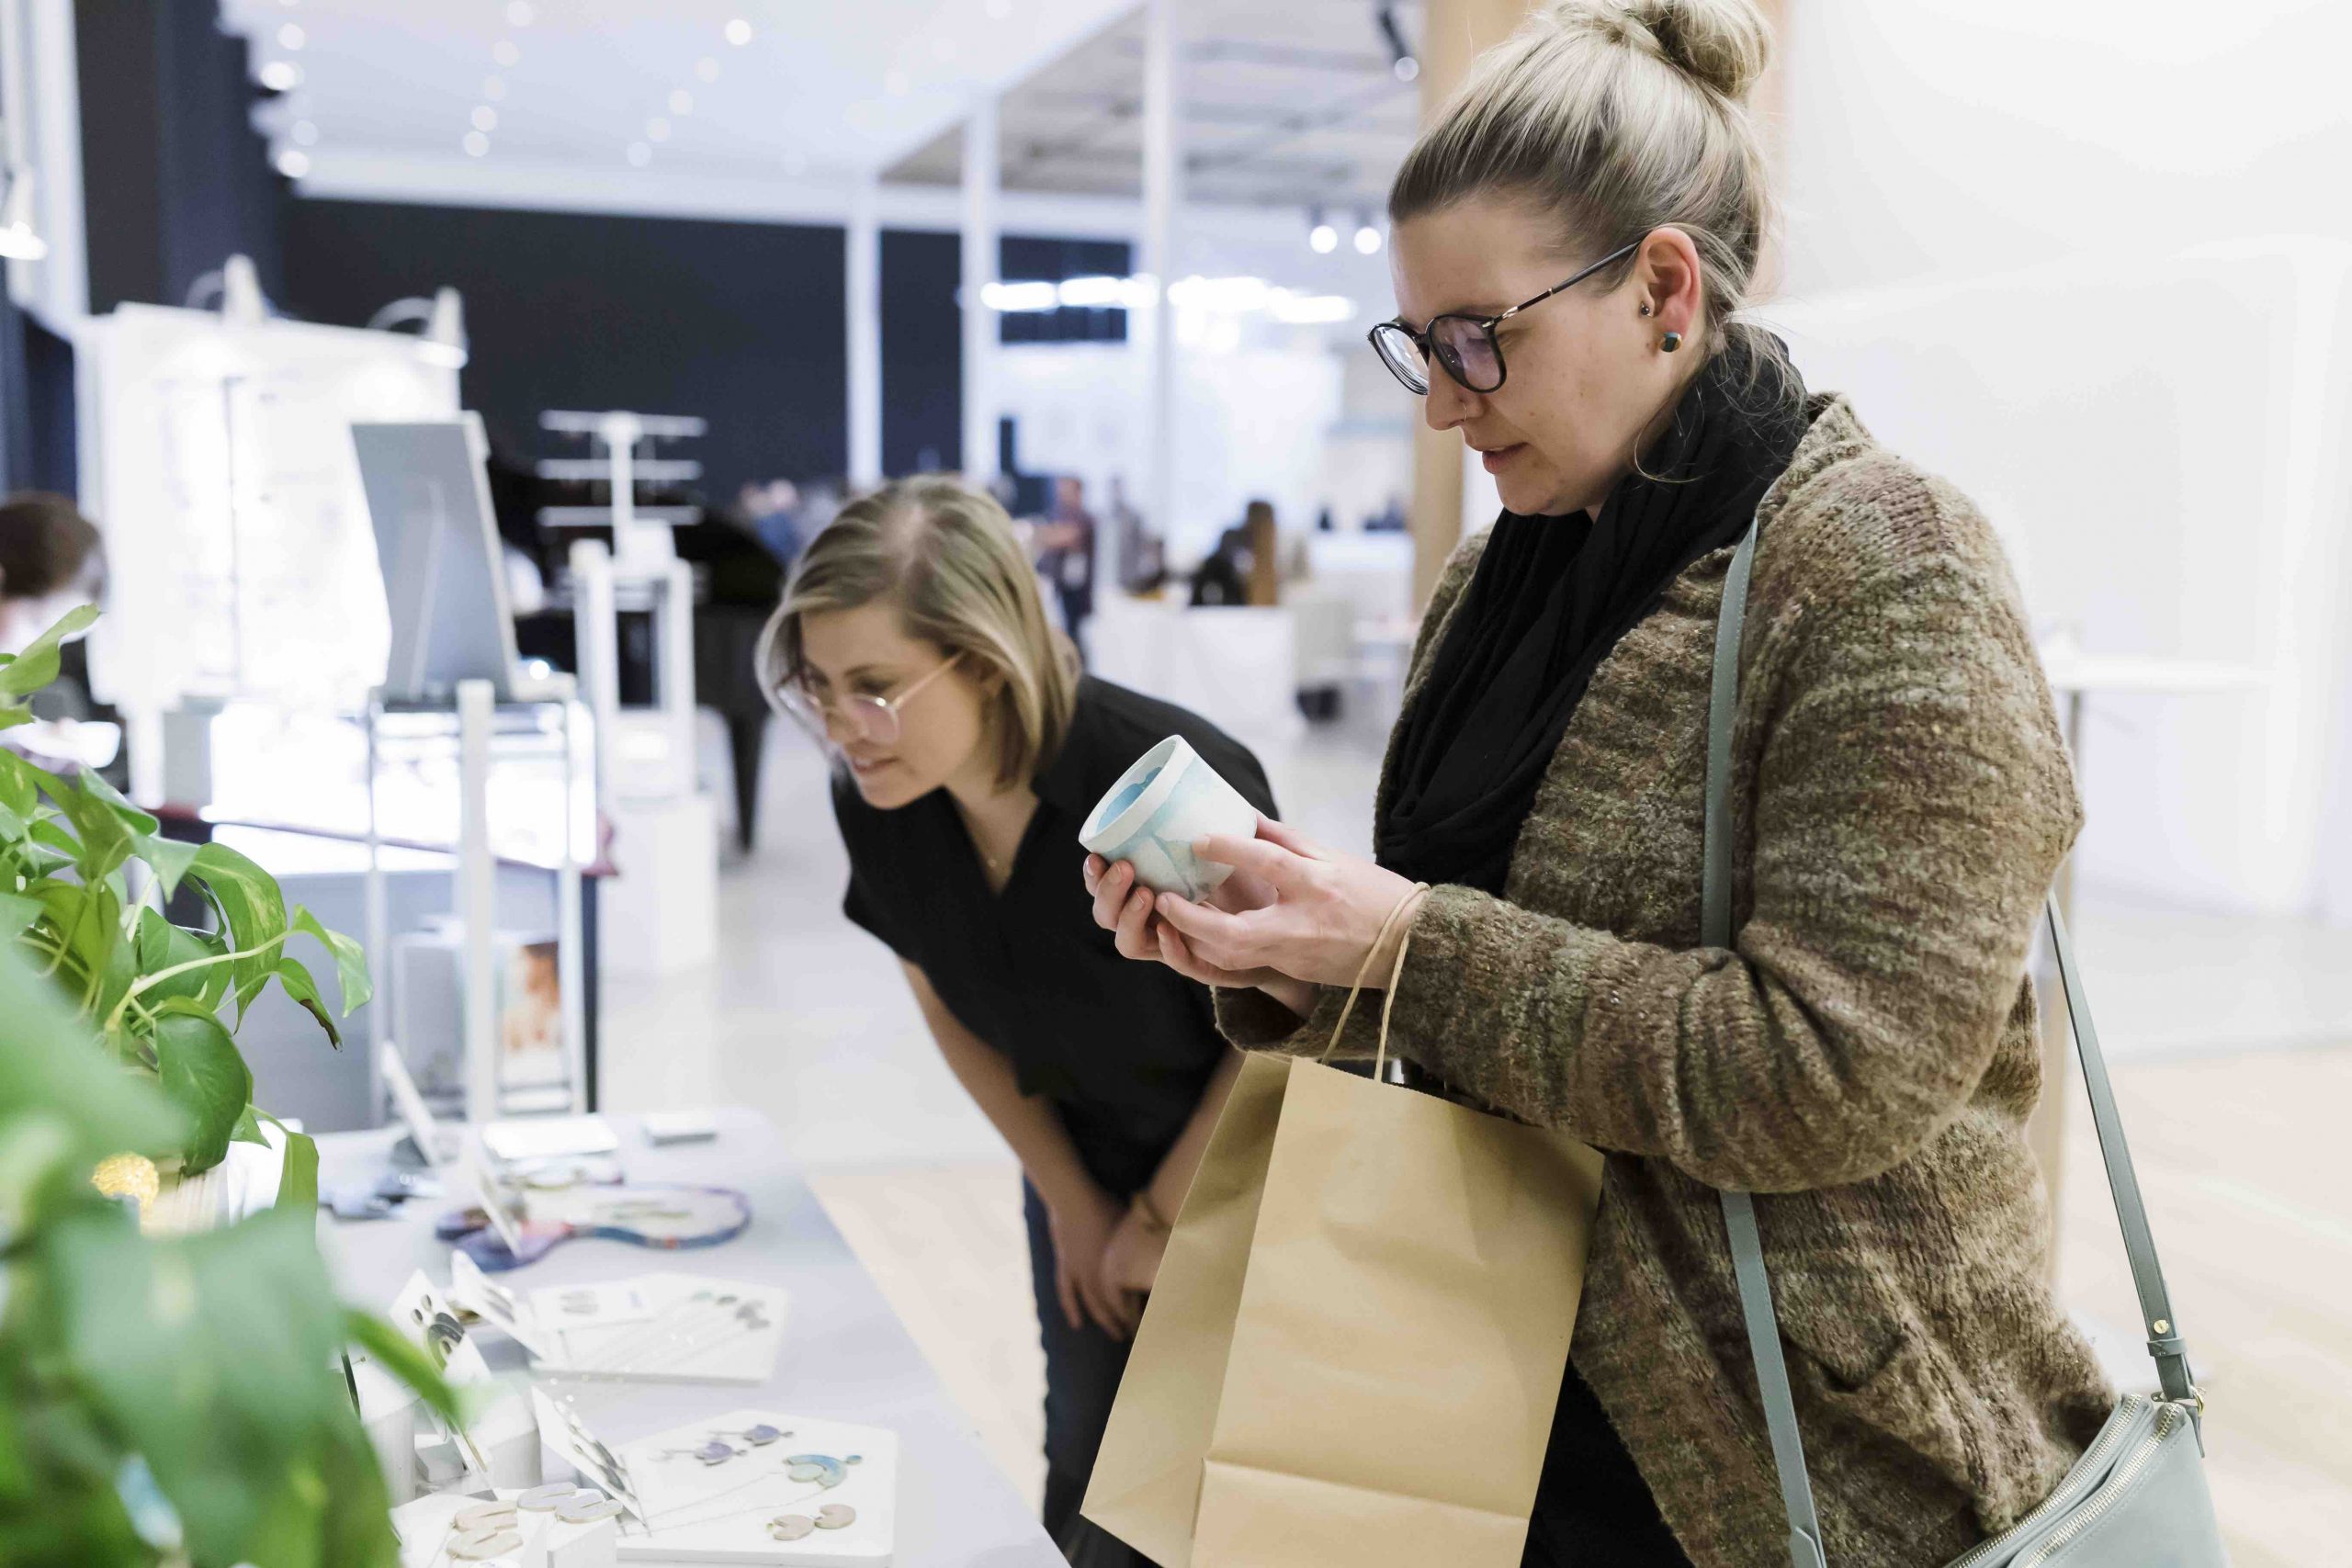 Two people look at items for sale at a Remai Modern shopping event.